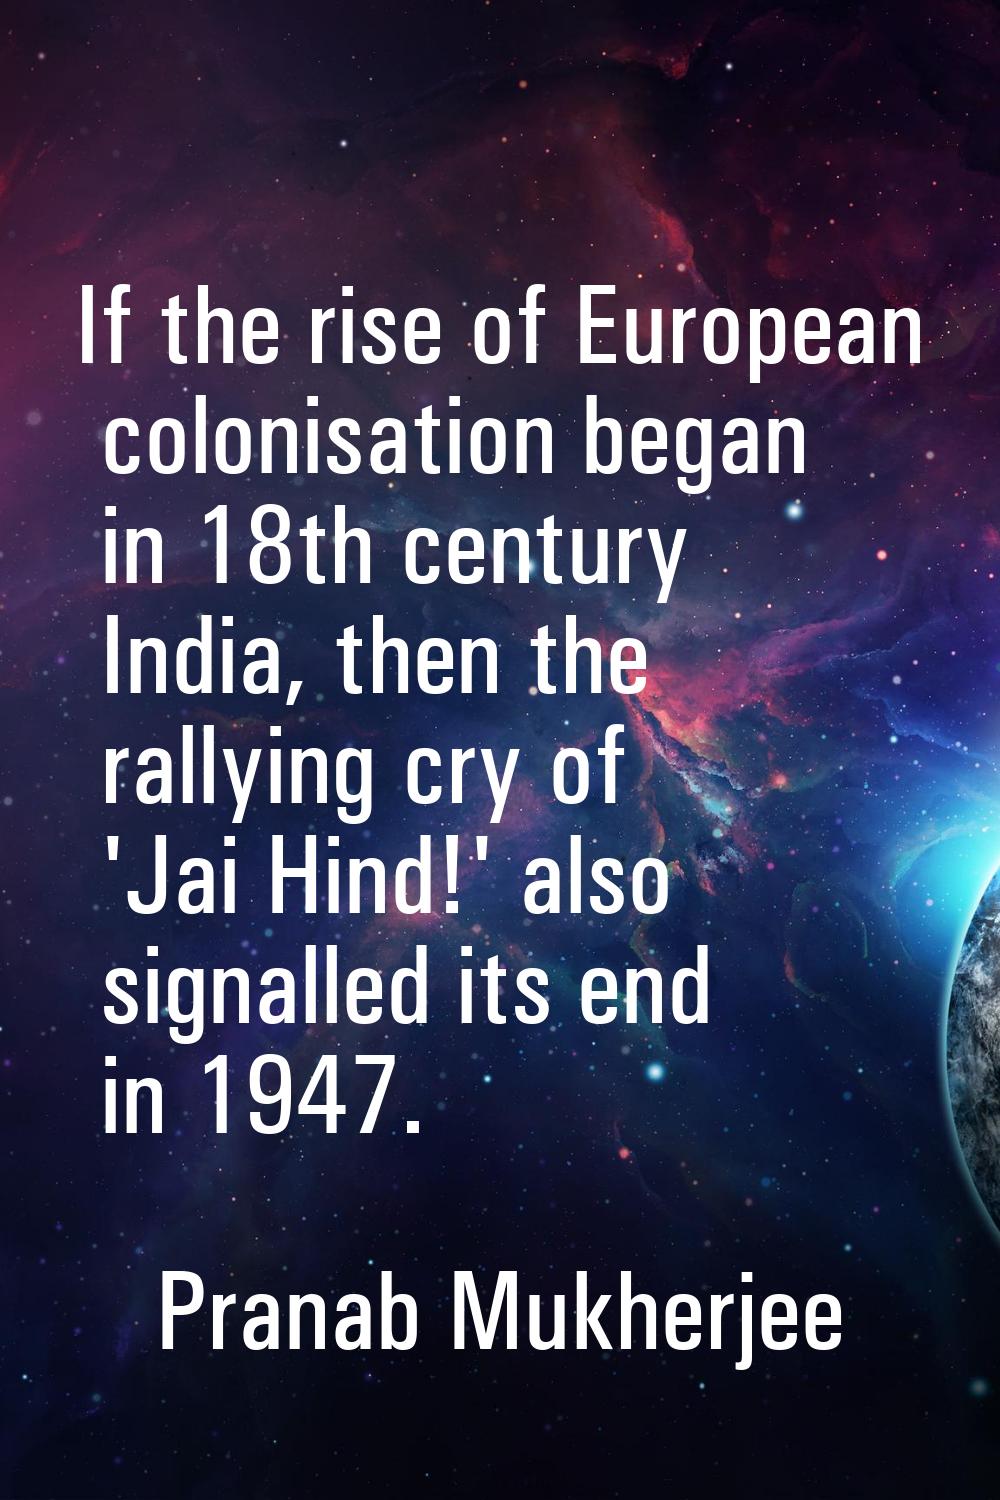 If the rise of European colonisation began in 18th century India, then the rallying cry of 'Jai Hin